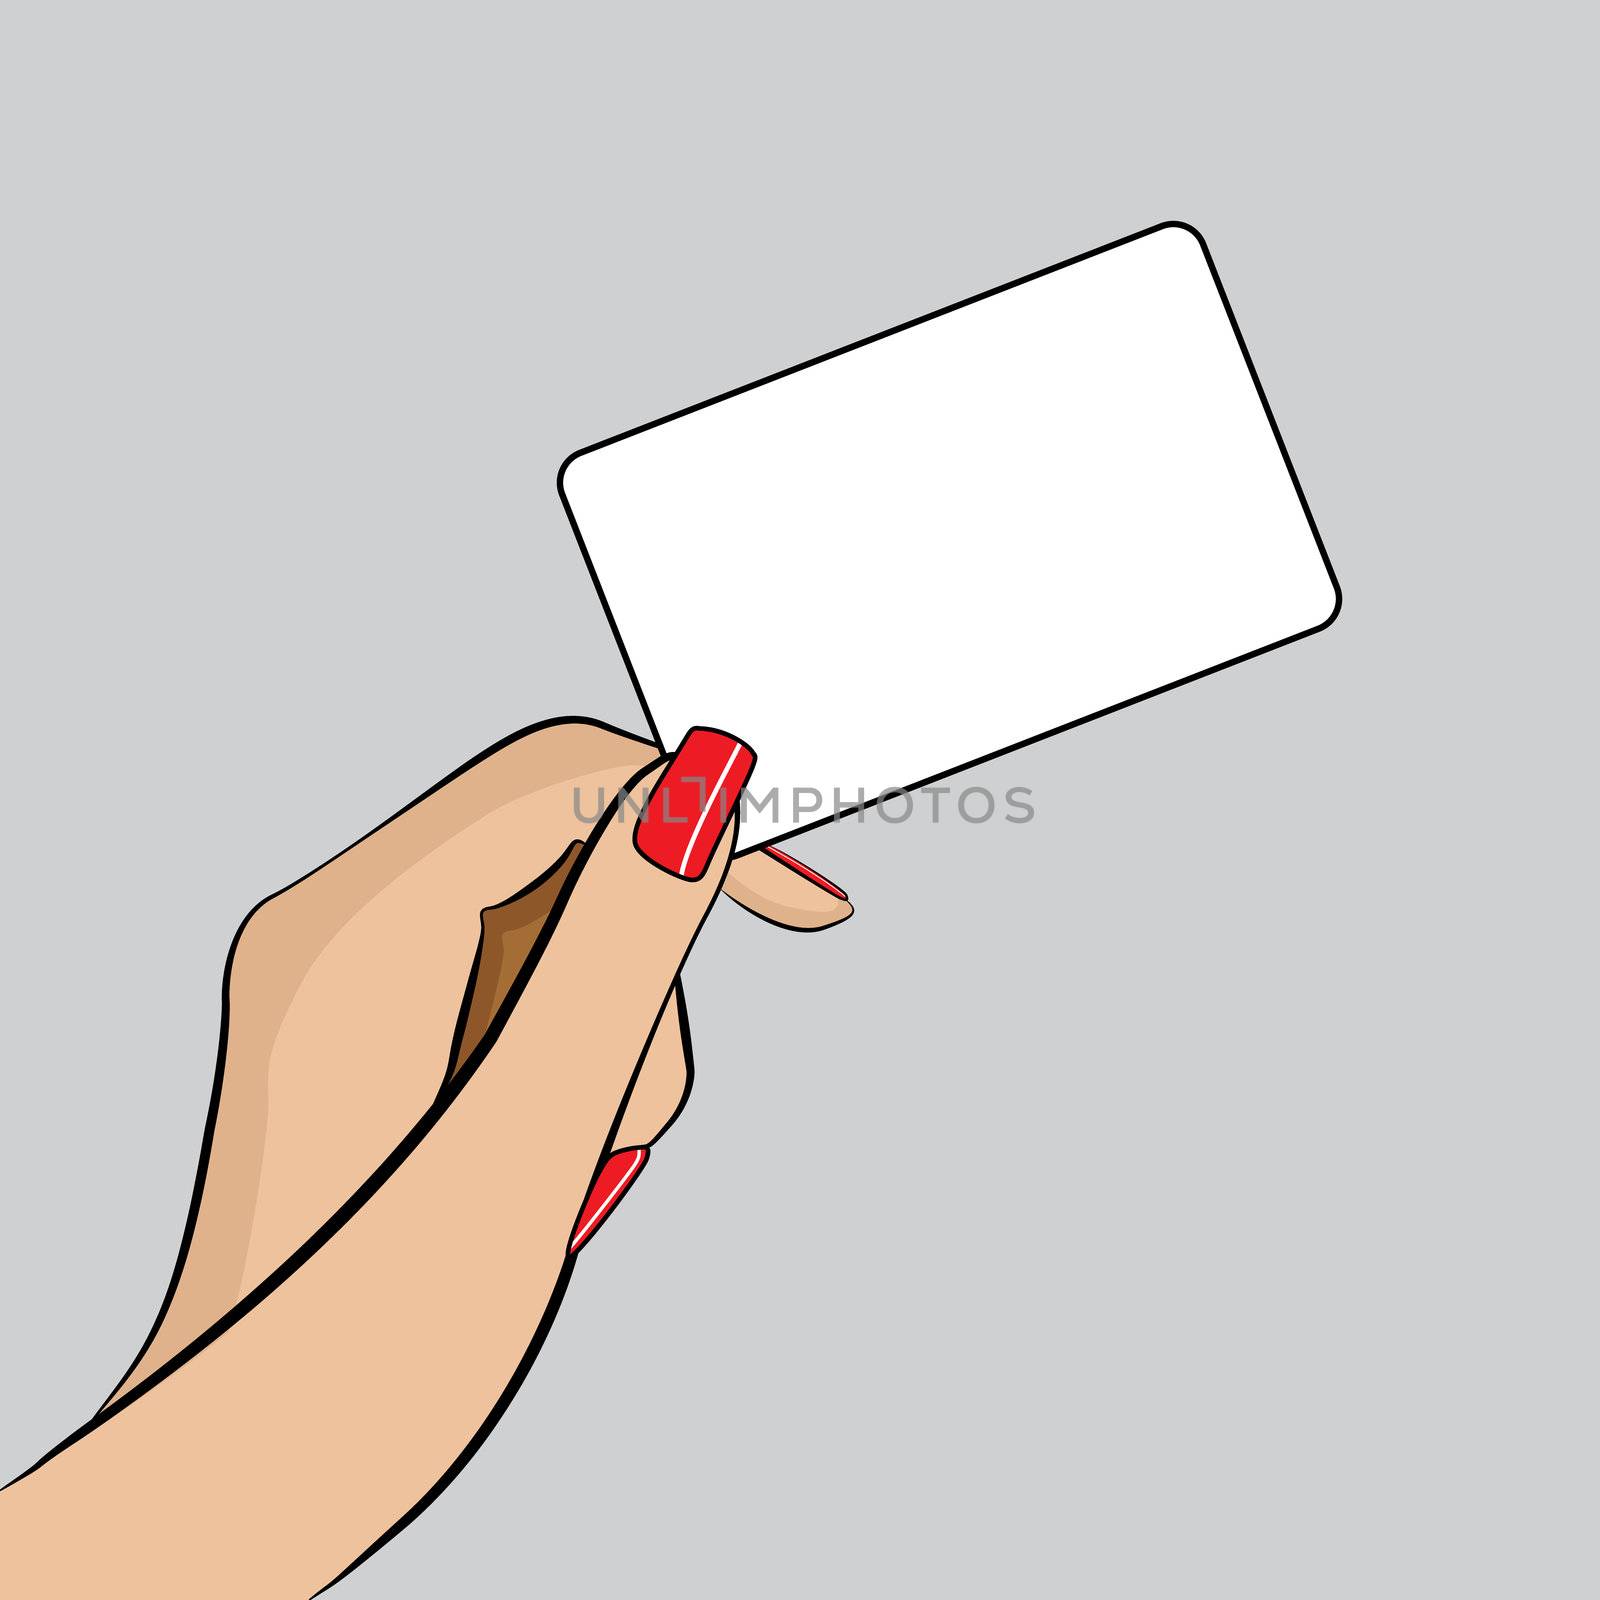 PopArt Illustration of a hand with a Business Card by DragonEyeMedia